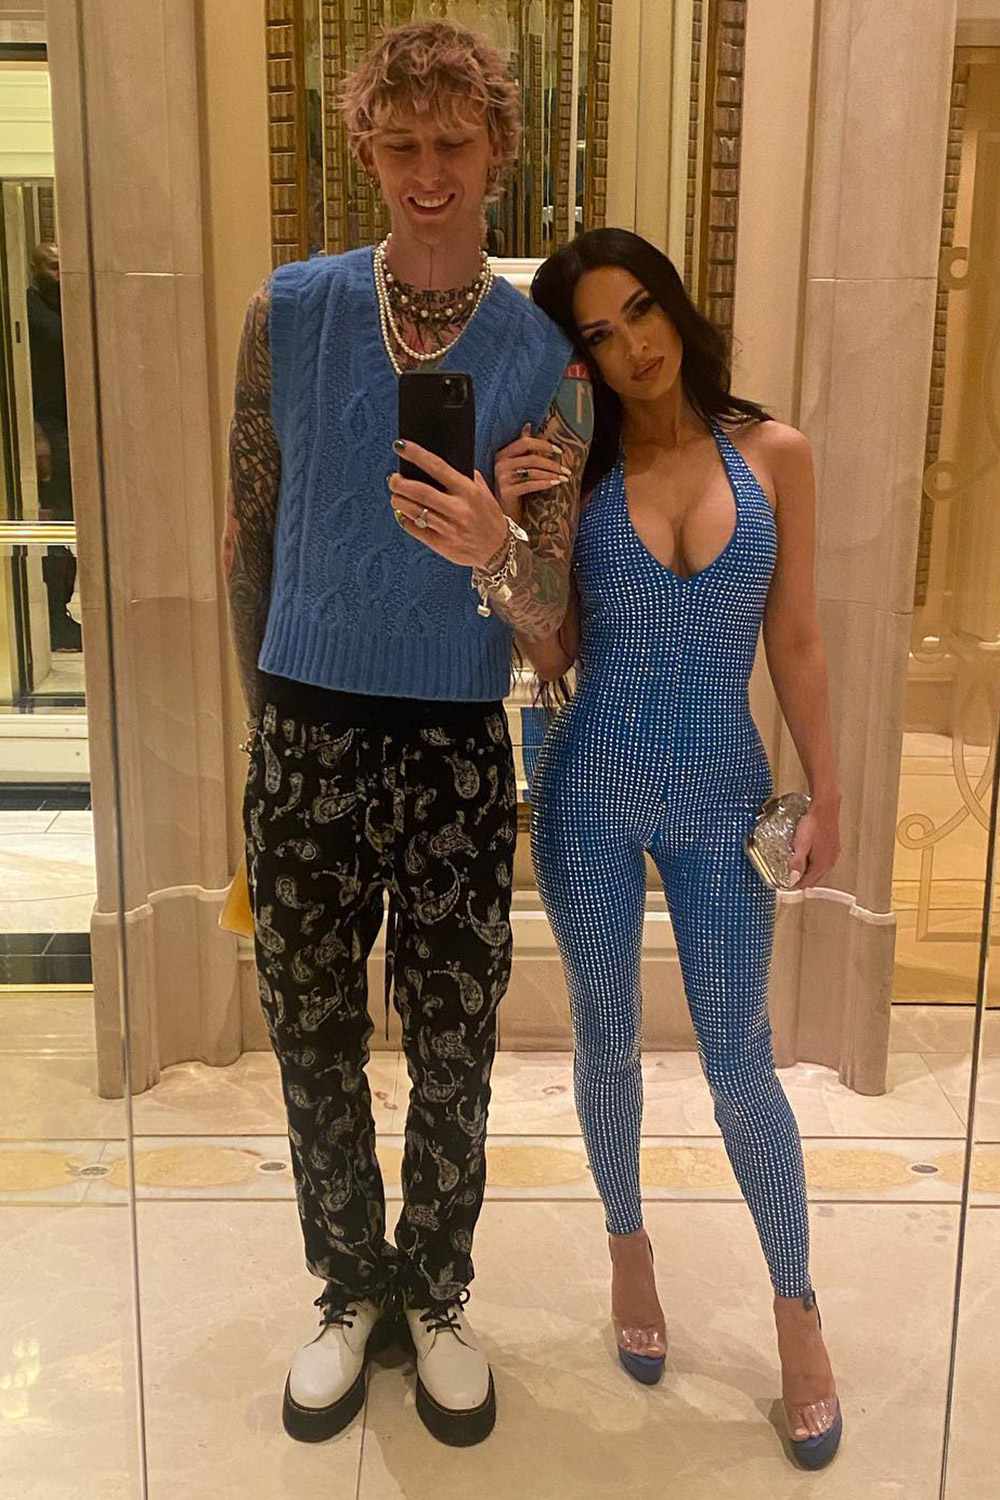 Machine Gun Kelly Wishes Megan Fox a Happy Birthday — and Shows Off Their Ring-Finger Tattoos!